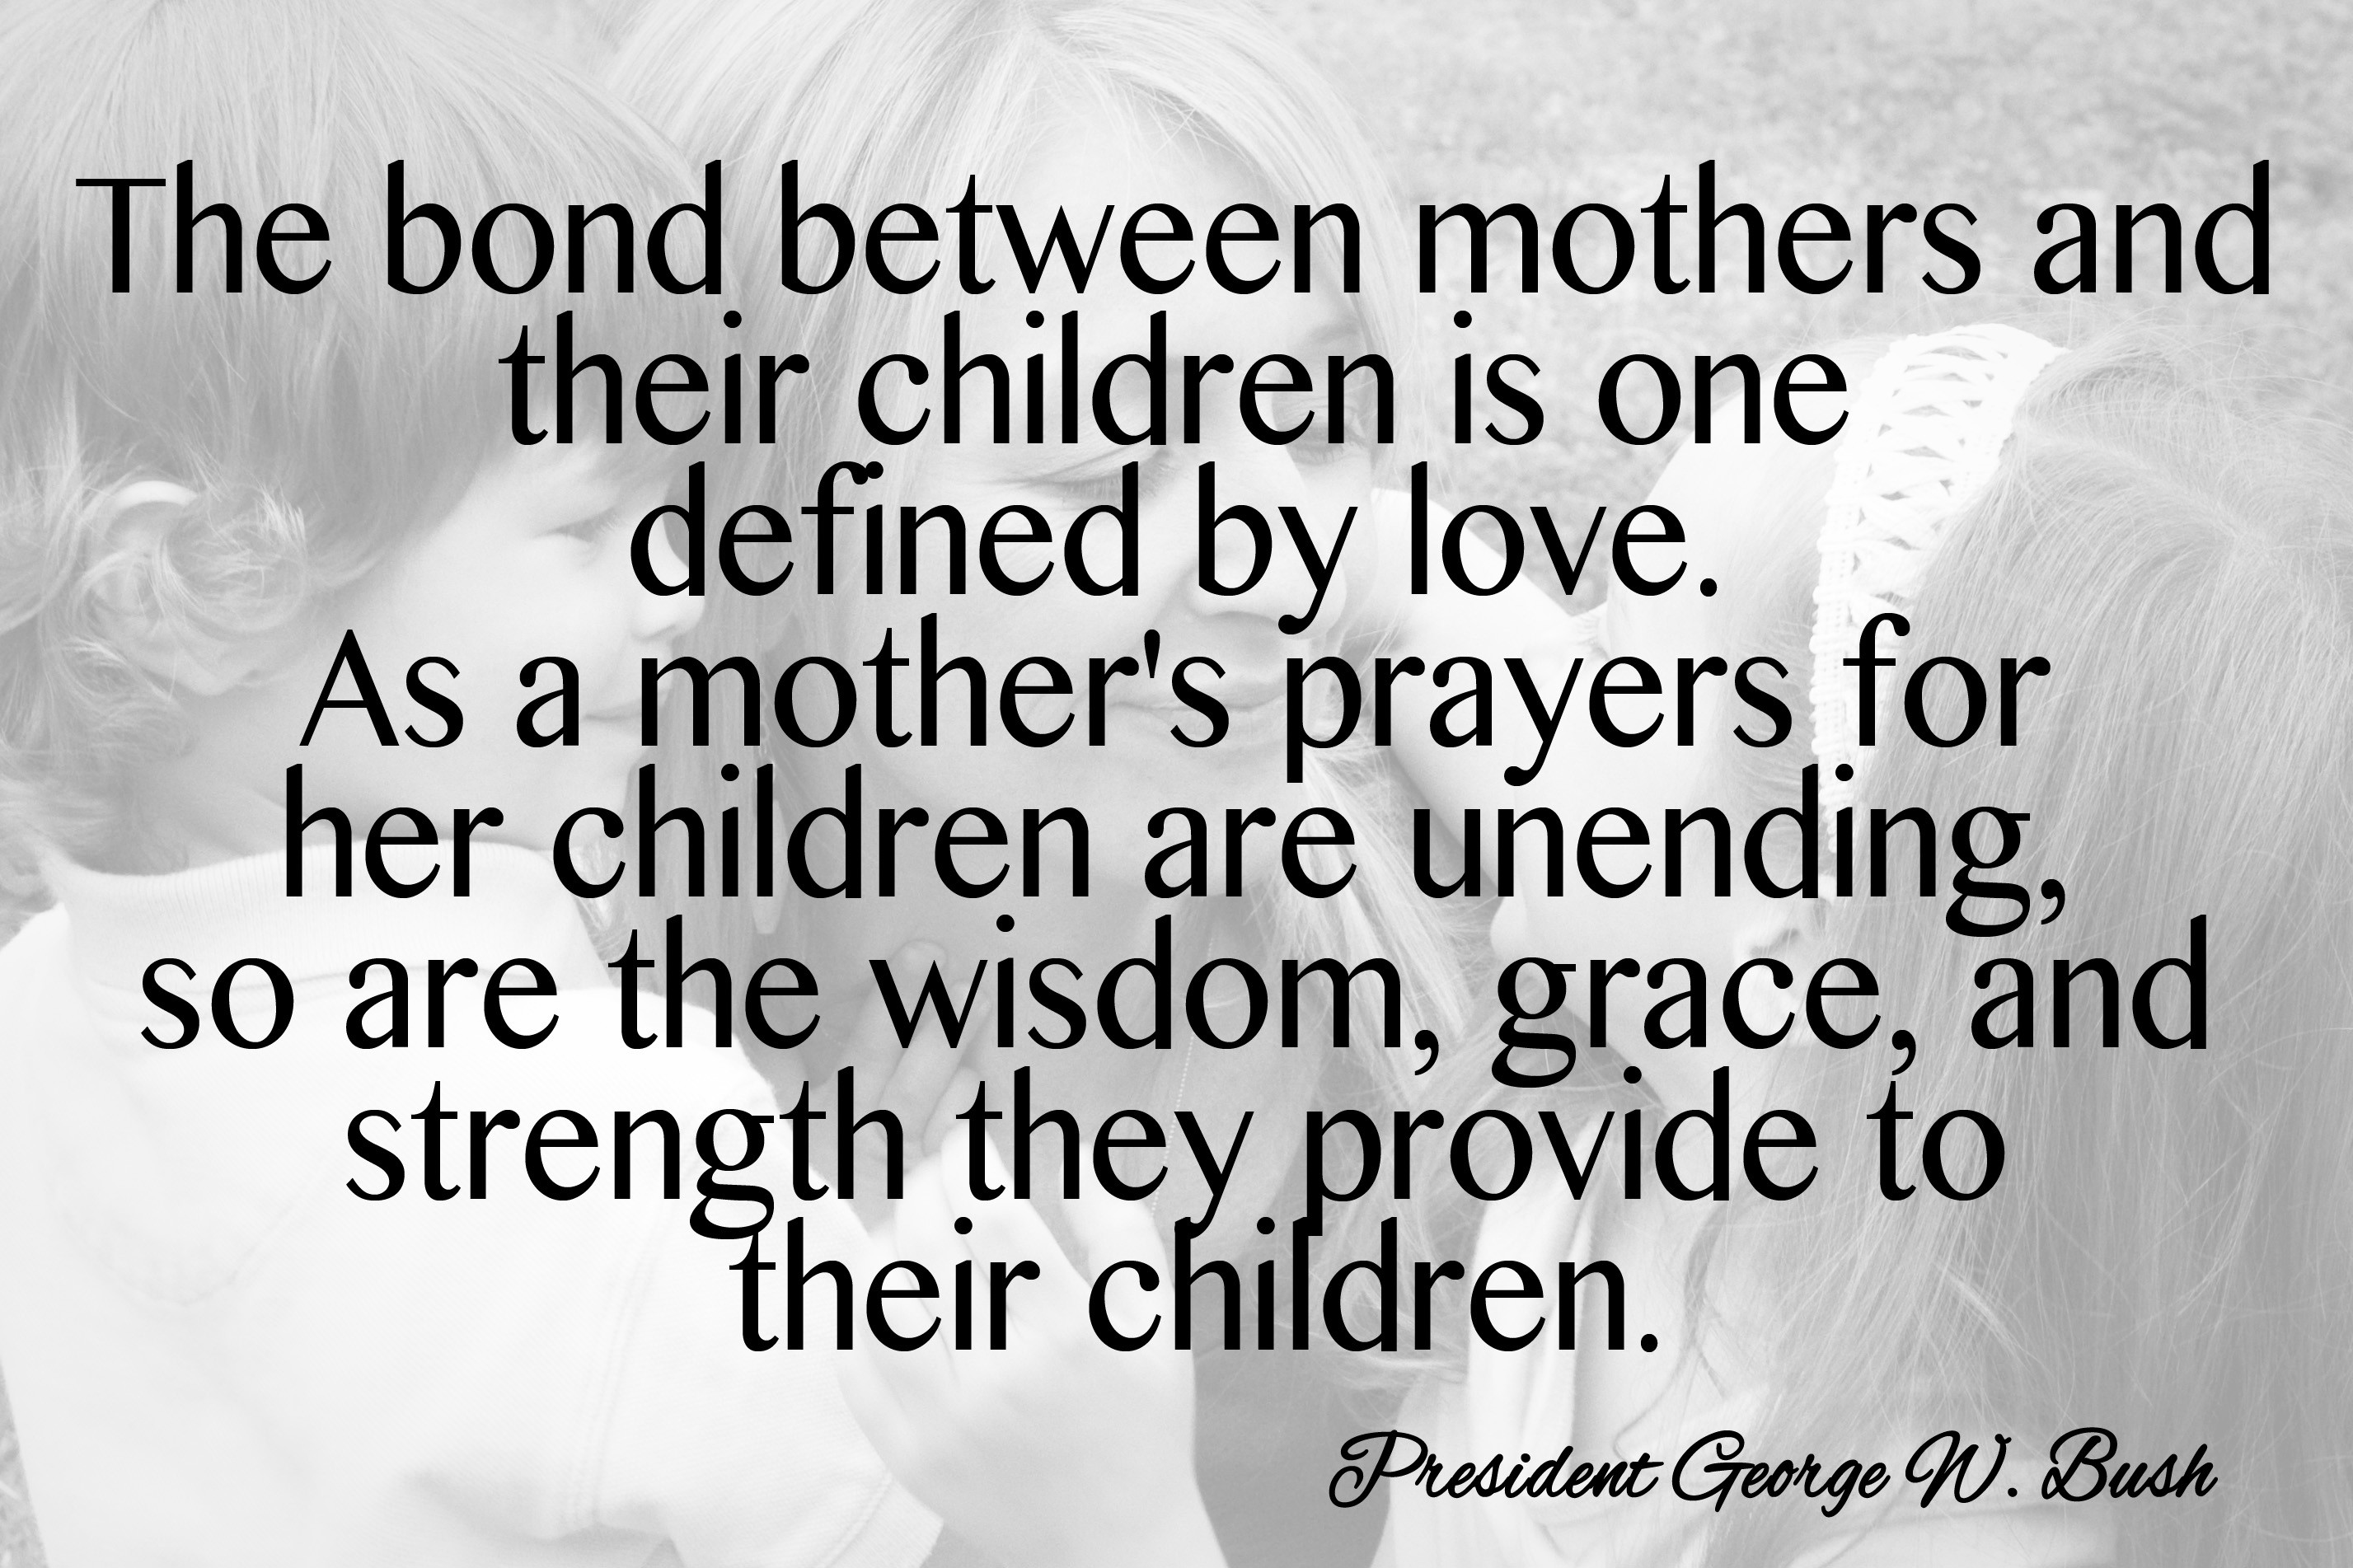 Famous Quotes About Mothers
 Mothers Day quotes – yourhappyplaceblog